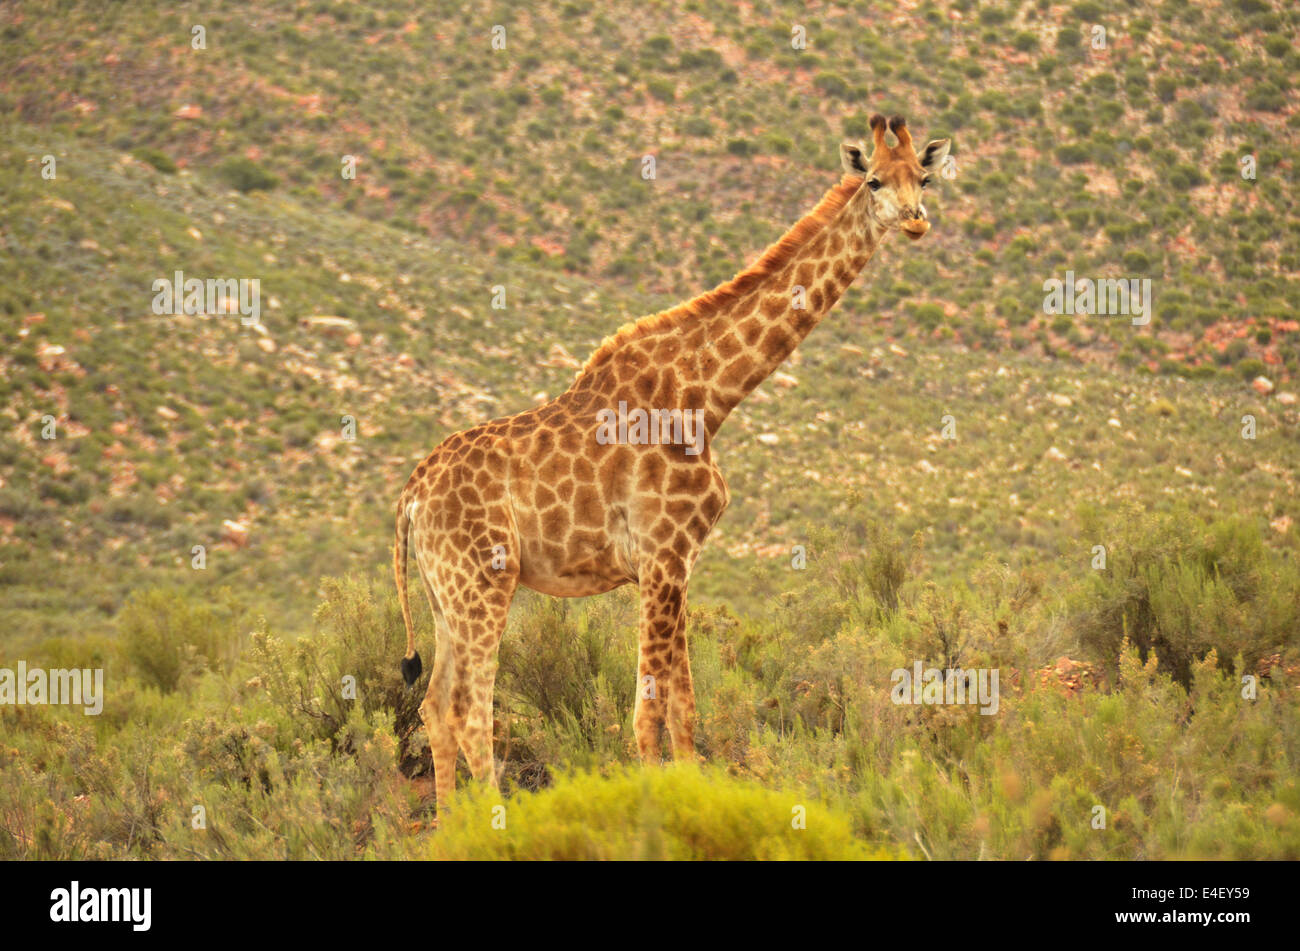 Camouflage in nature... a young Giraffe standing against a scrub background in the Little Karroo, Western Cape, South Africa Stock Photo